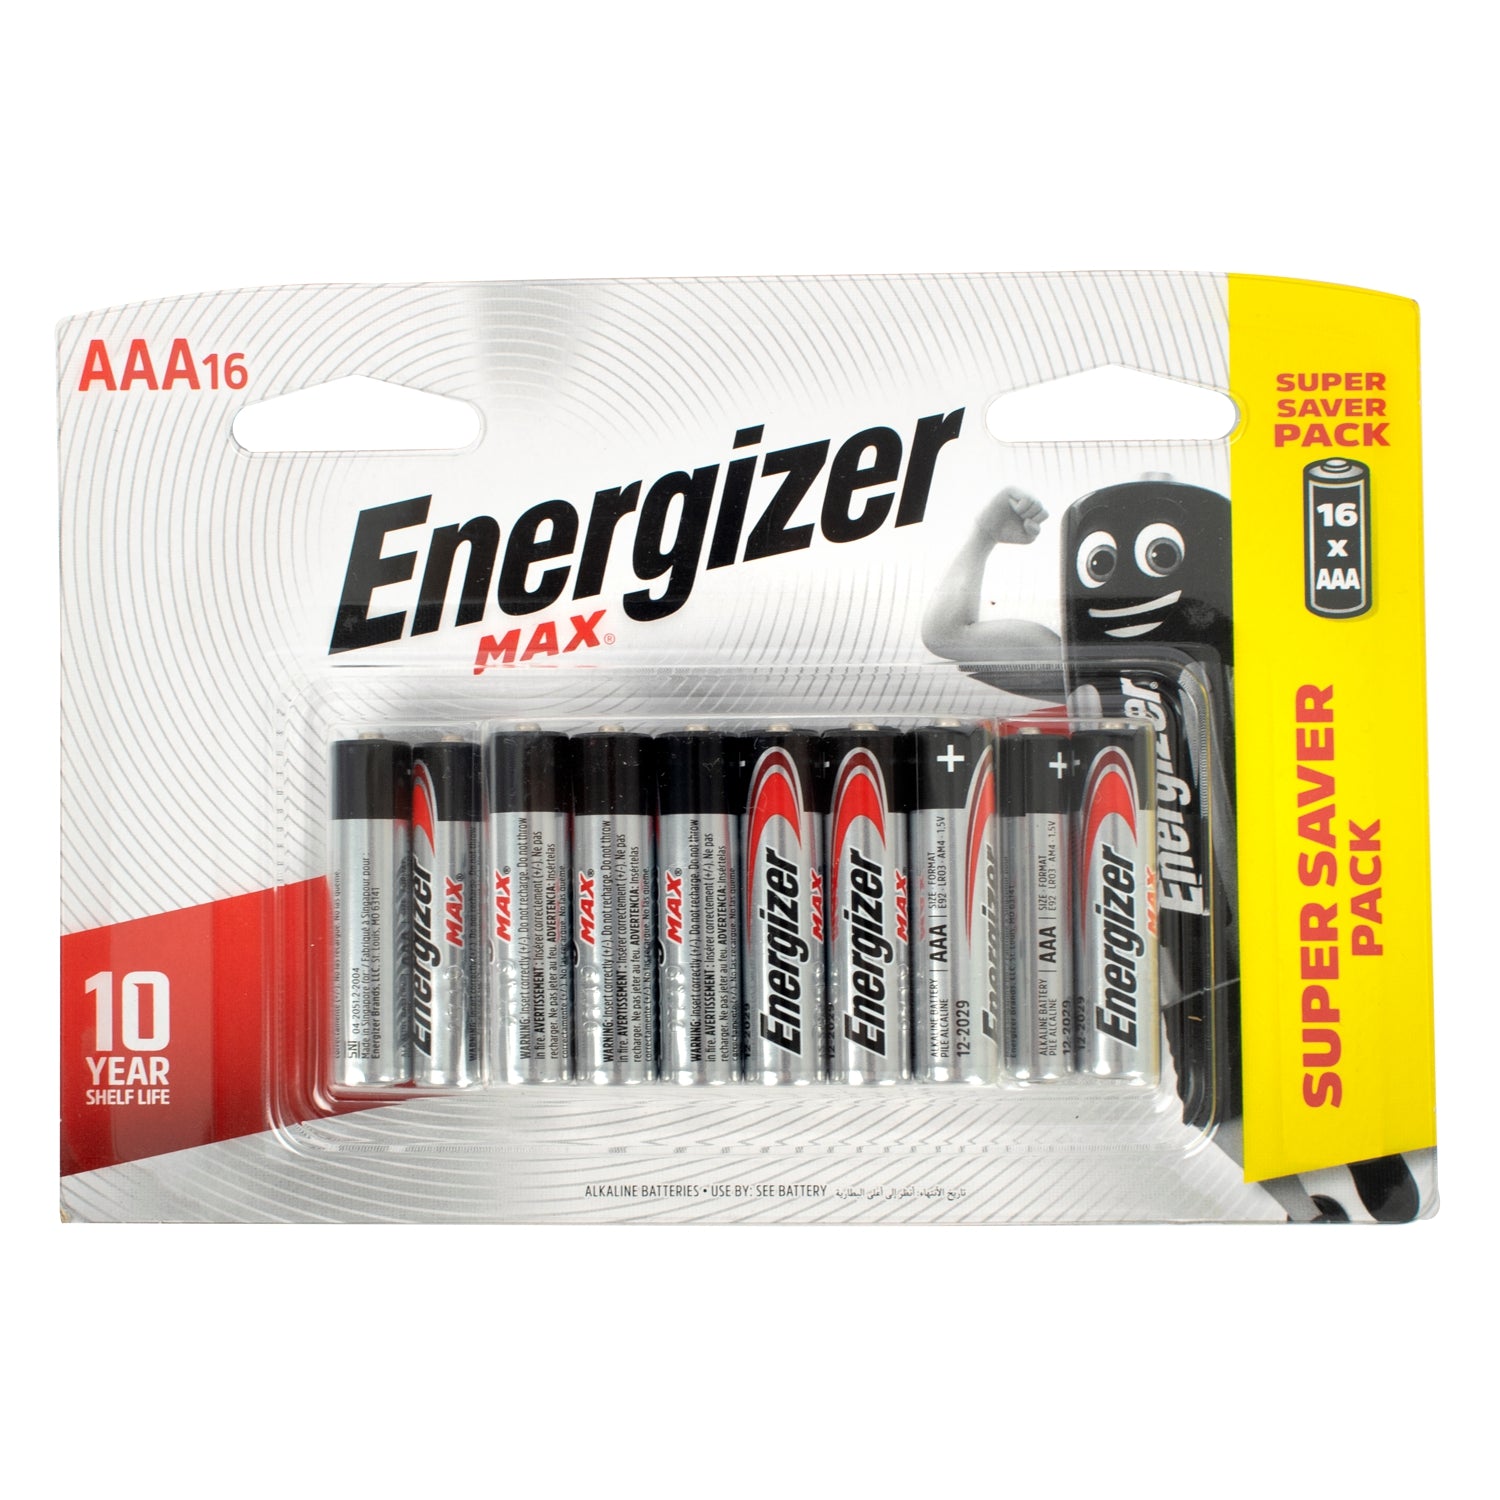 Energizer max aaa-16 pack (175x120mm pack)